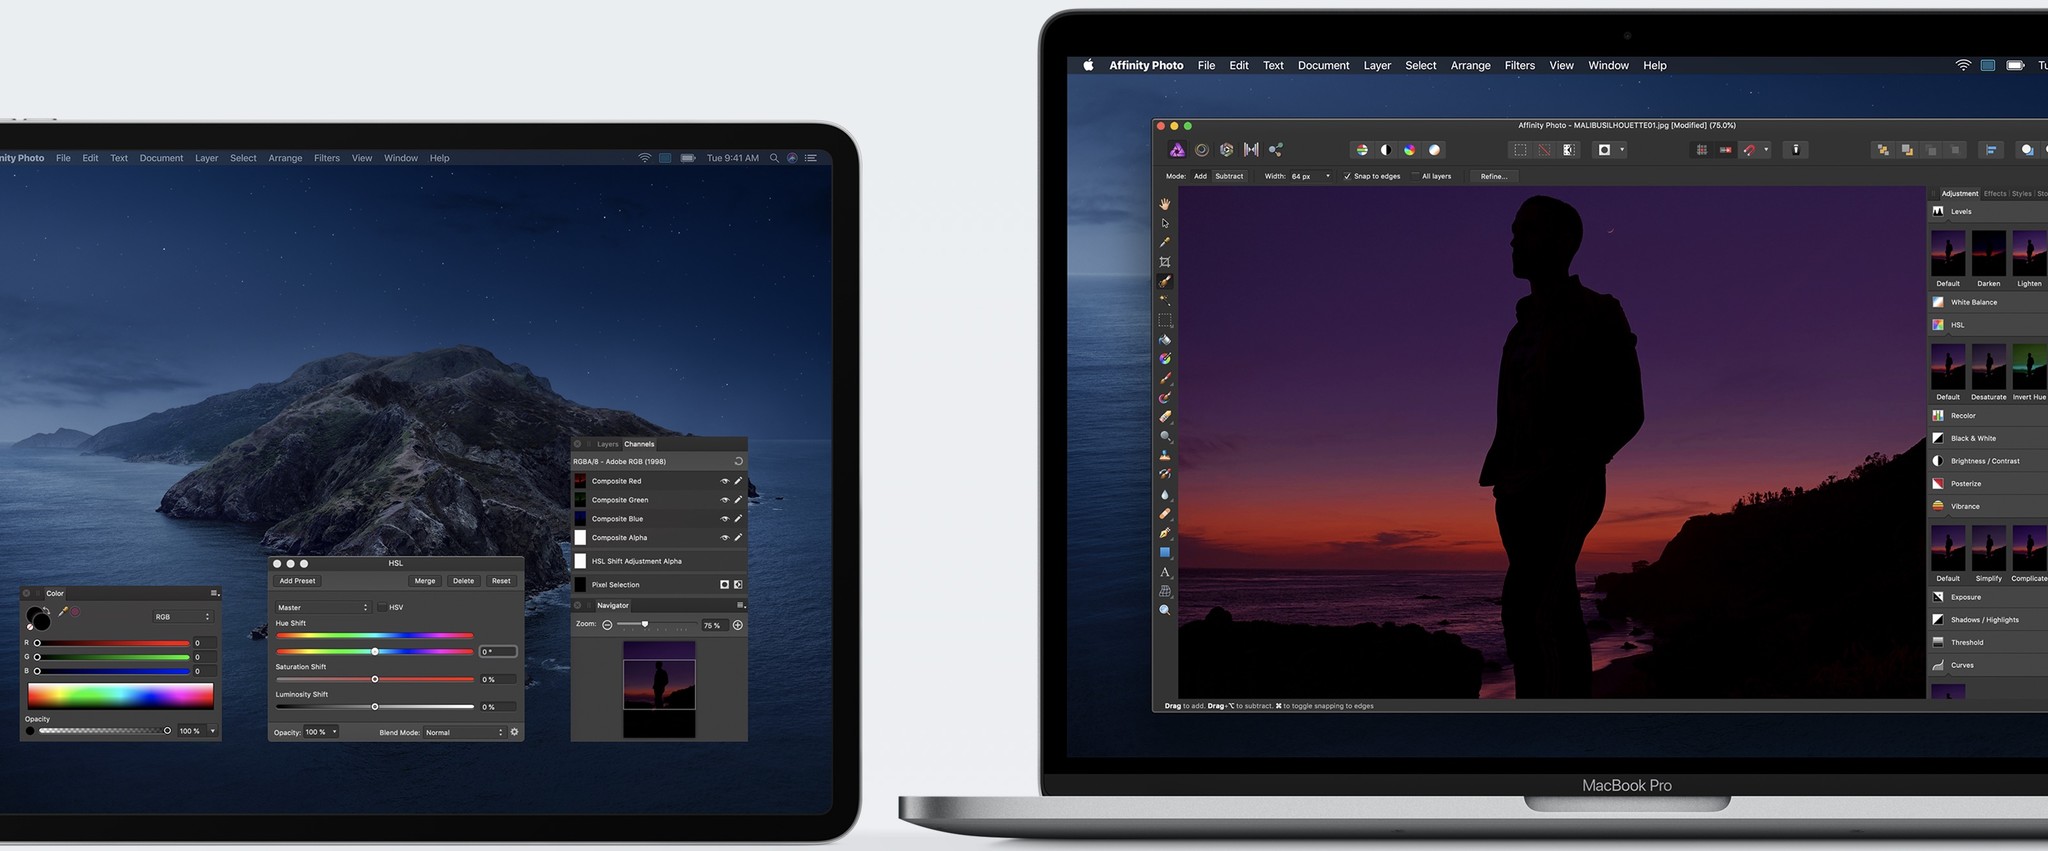 Sidecar for macOS Catalina on Mac and iPad